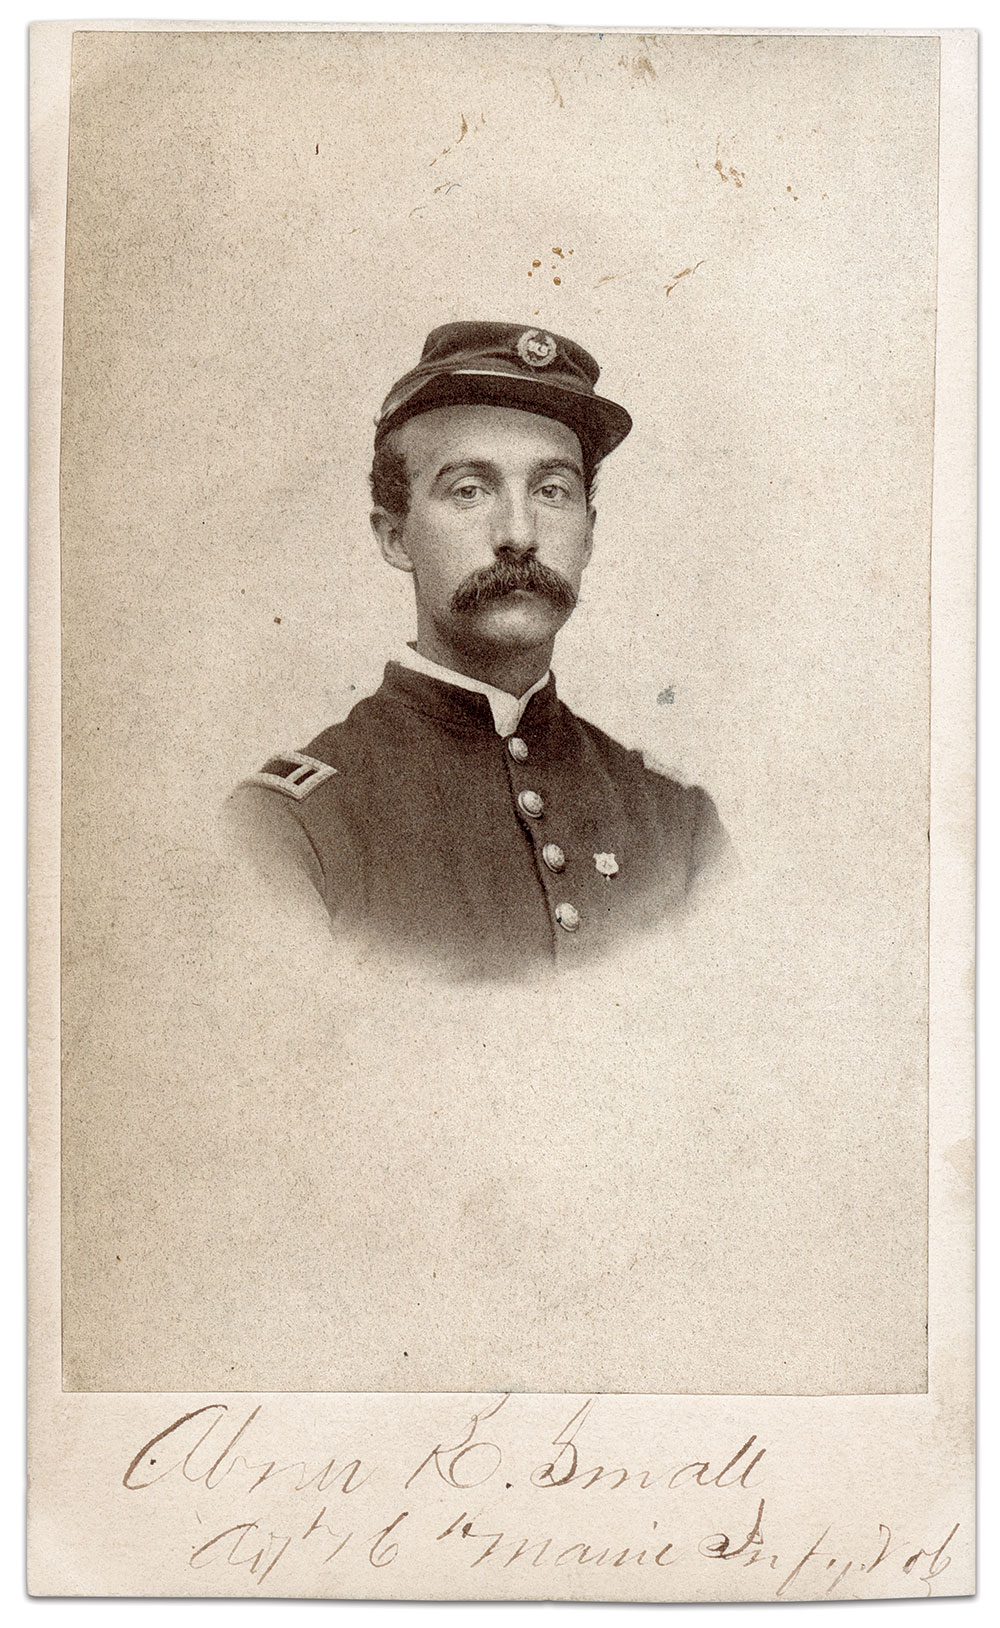 Abner Randolph Small (1836-1910) by an anonymous photographer.